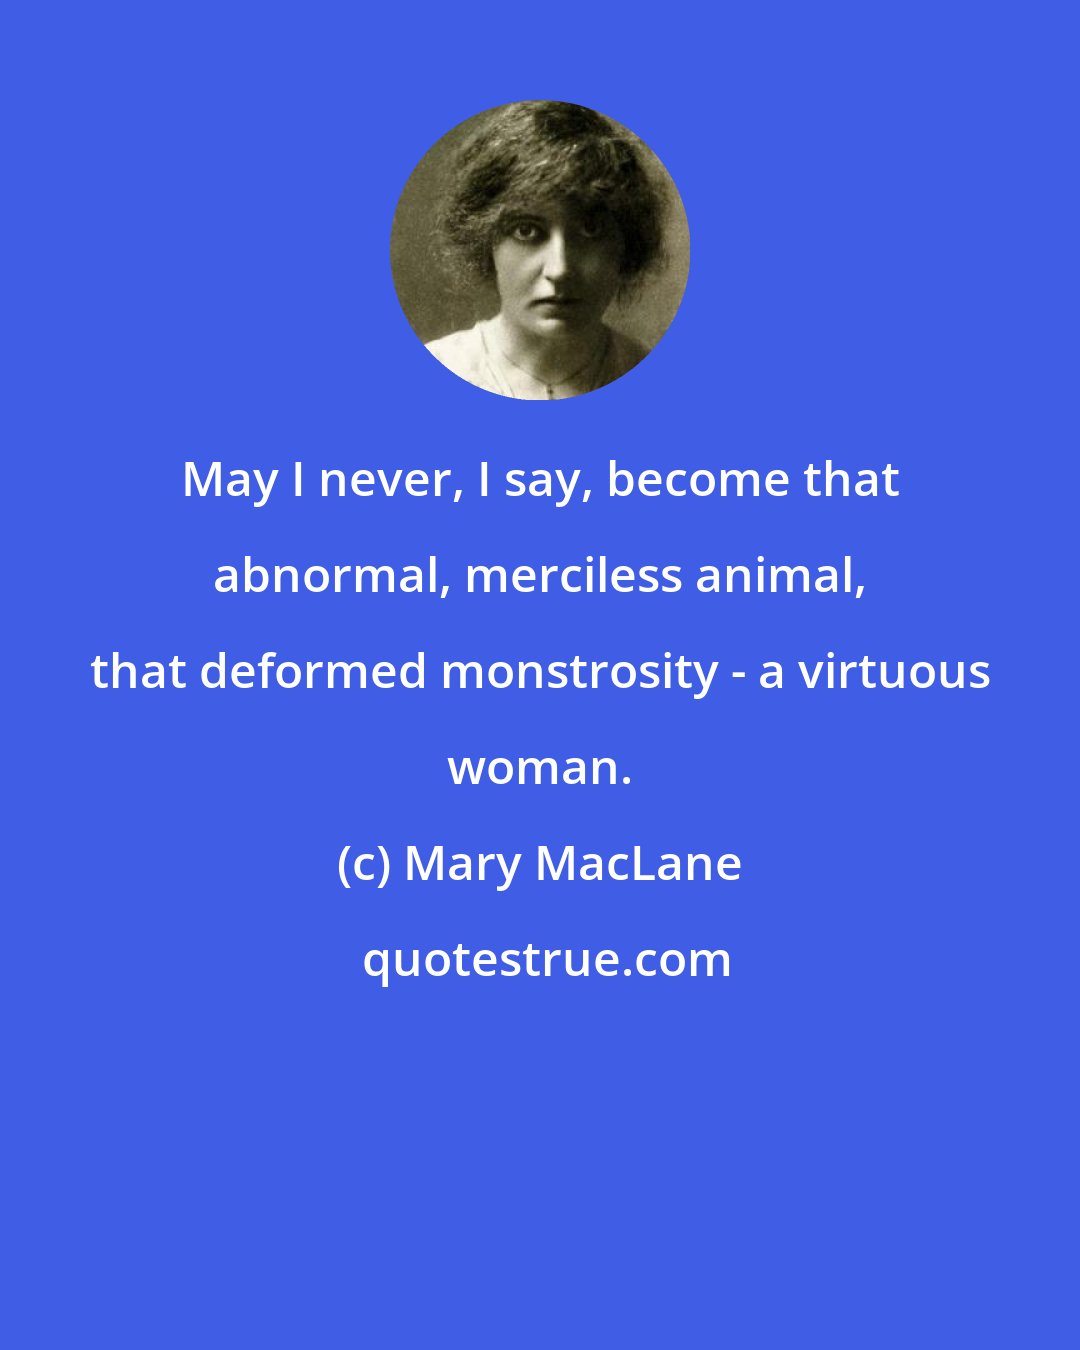 Mary MacLane: May I never, I say, become that abnormal, merciless animal, that deformed monstrosity - a virtuous woman.